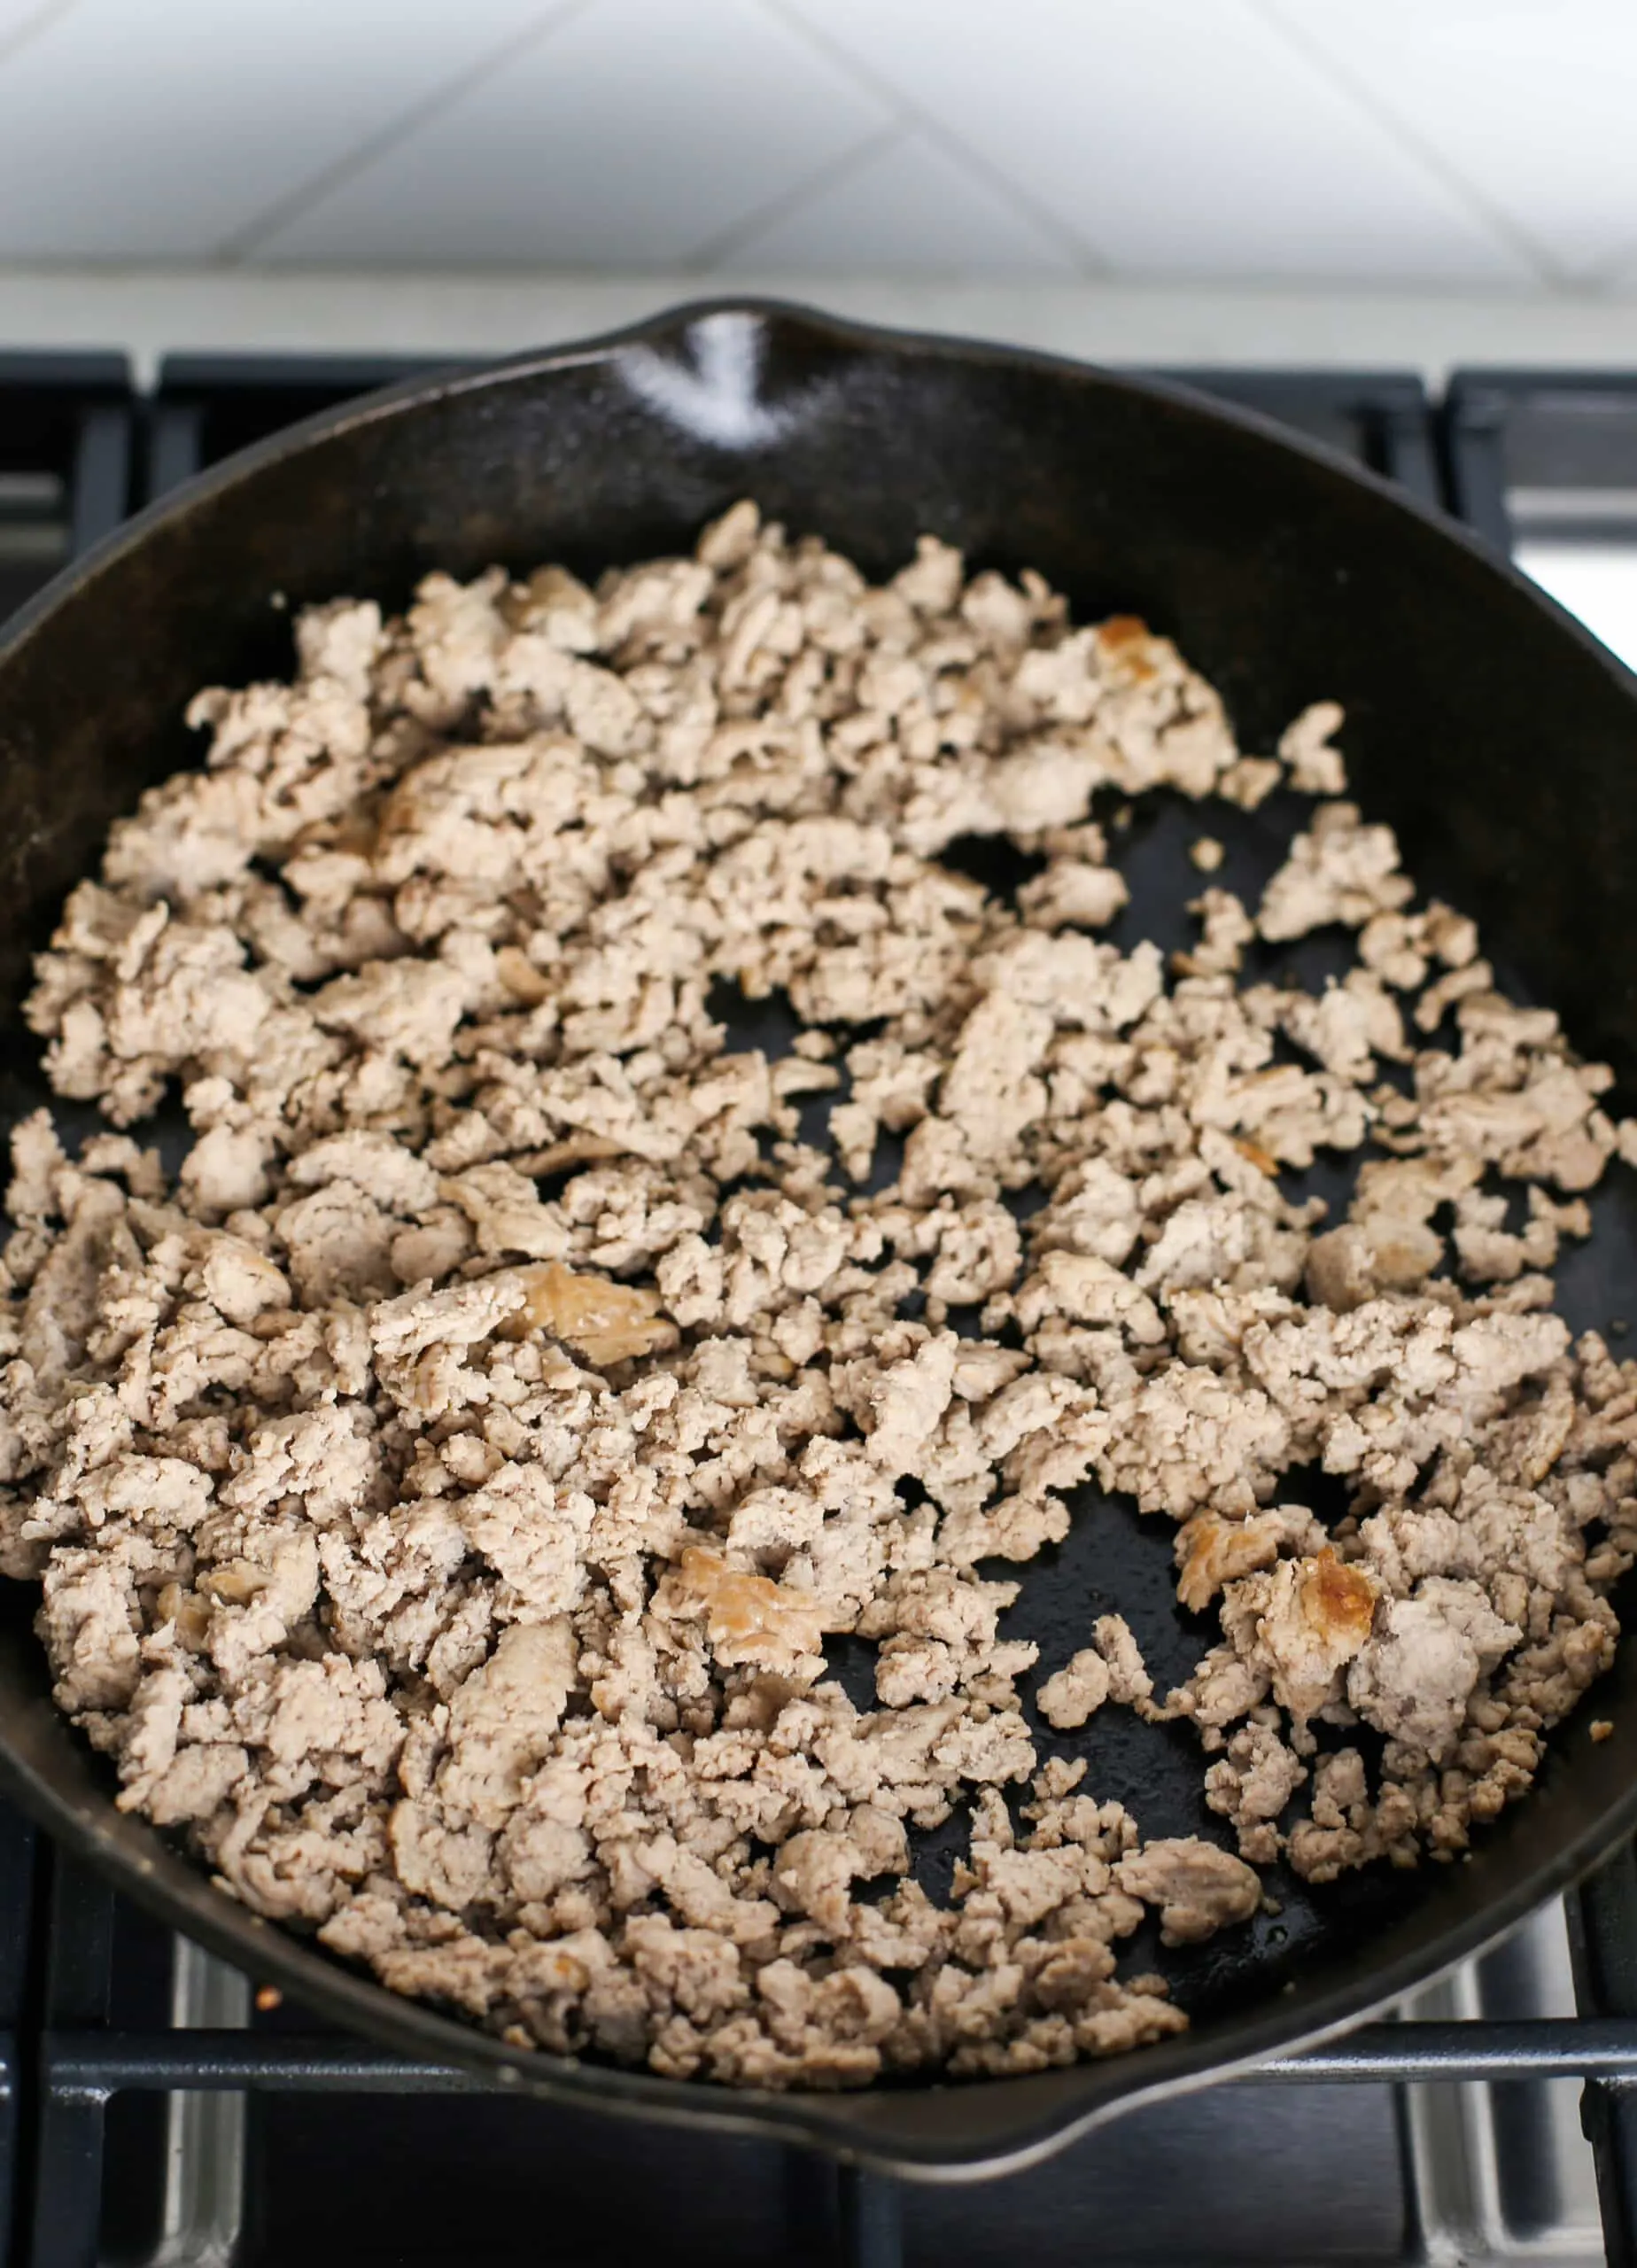 Cooked ground turkey in a large black cast iron skillet.